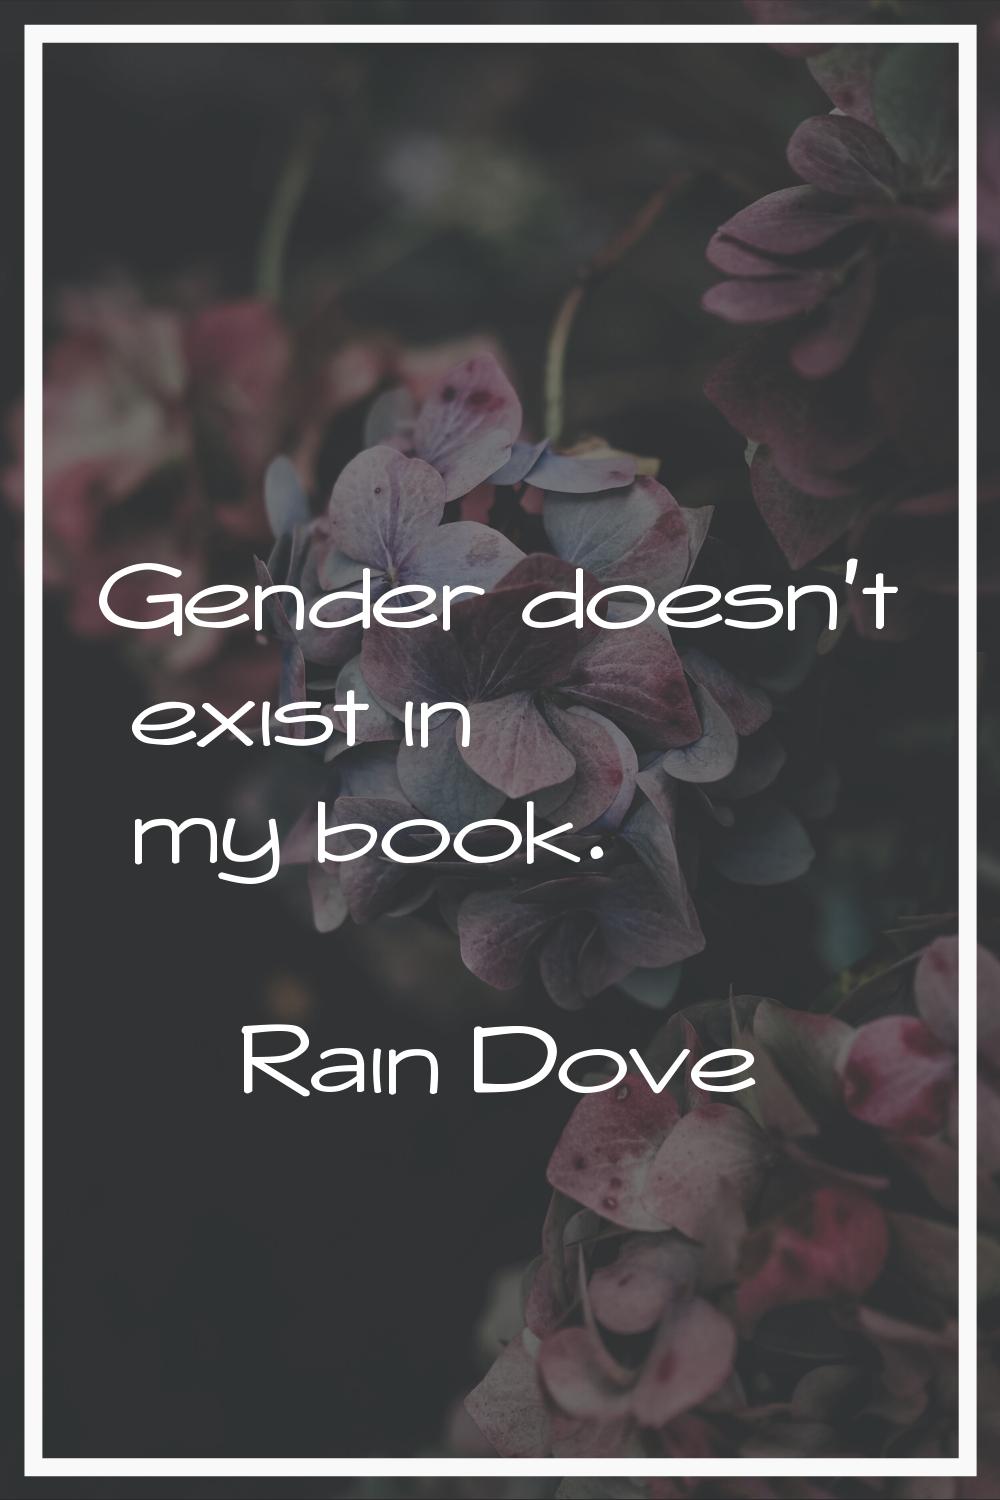 Gender doesn't exist in my book.